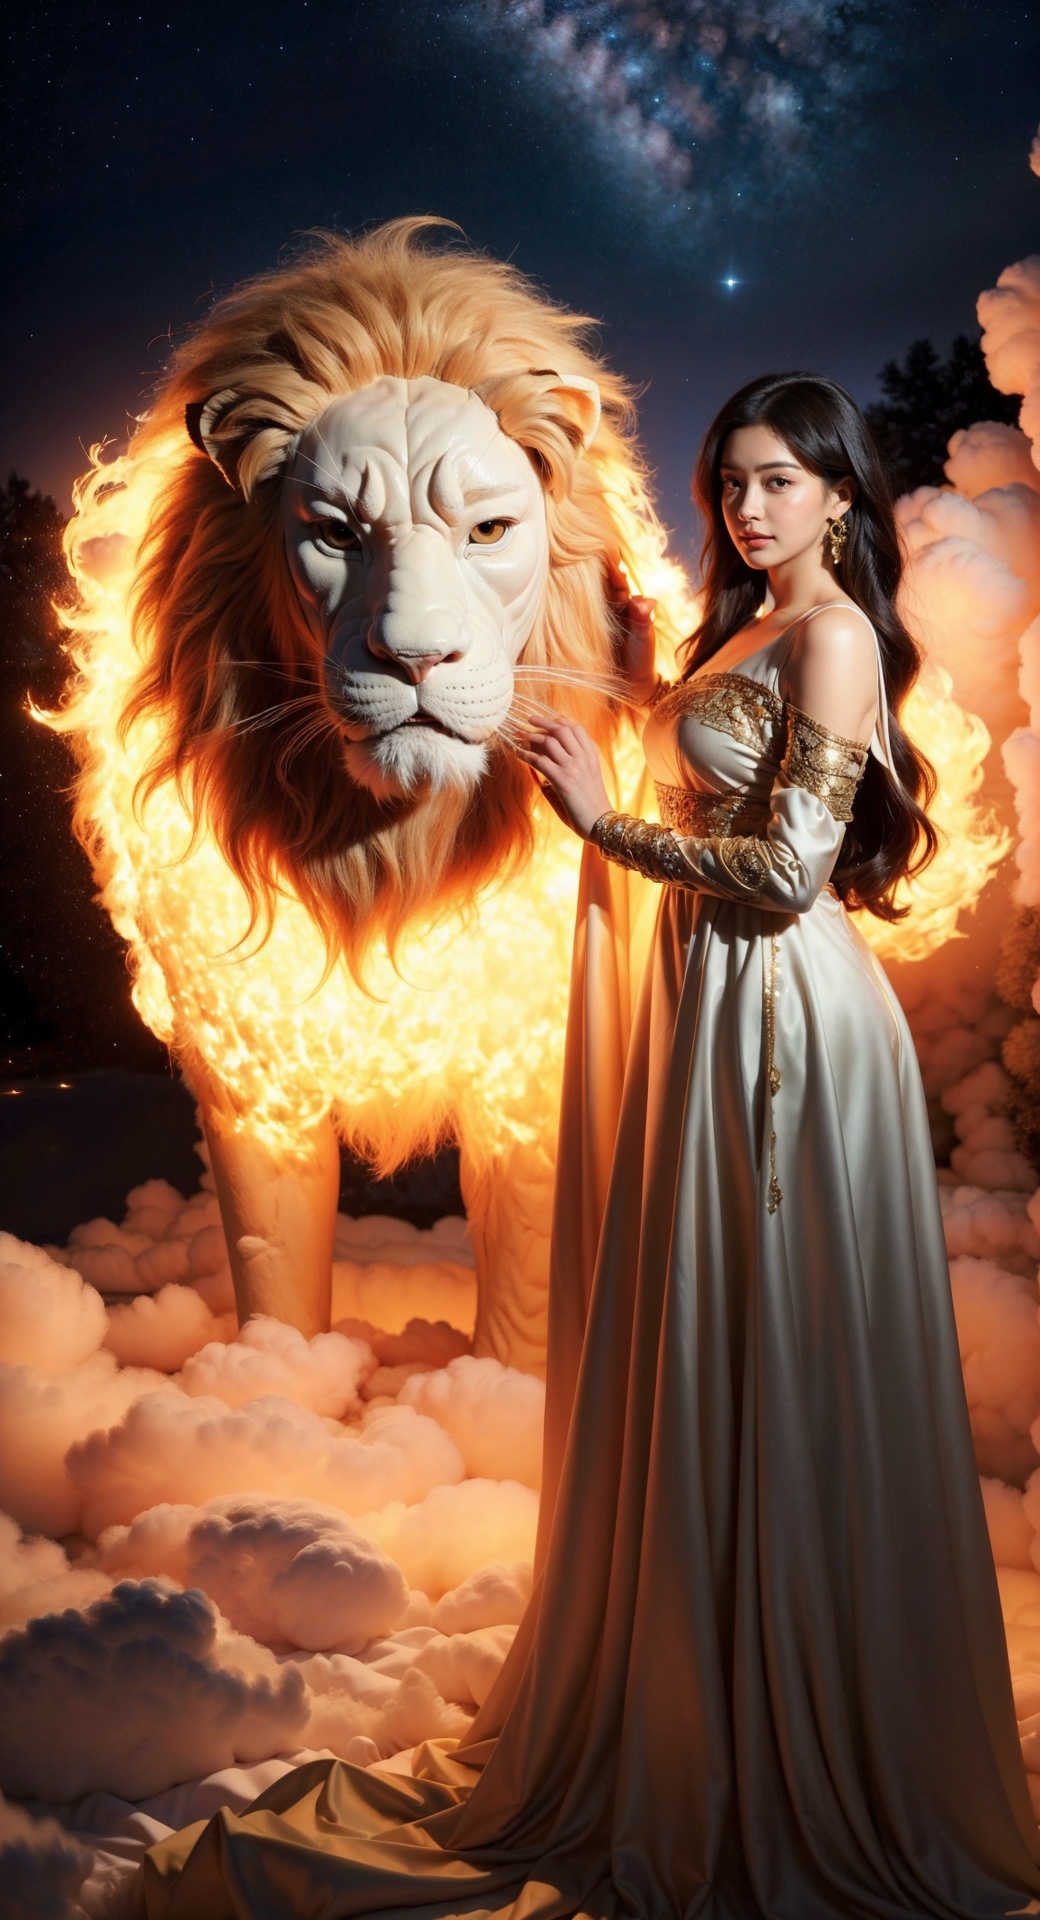 (1 girl), (wearing a gold embroidered dress), with long white hair, standing next to a flame lion. The lion is covered in flames, and the background is starry sky. The girl's gaze is firm, while the lion's gaze is wild and loyal. The entire scene is full of mystery and adventure. A girl with a fiery lion, night sky, stars, courage, determination, mythological creatures, fantasy, adventure, courage, loyalty, grandeur, magic, mystery, beauty (complex details, high resolution), clear focus, dramatic lighting, photo realistic art by Greg Rutkowski, Alphonse Mucha, and Frank Frazetta.